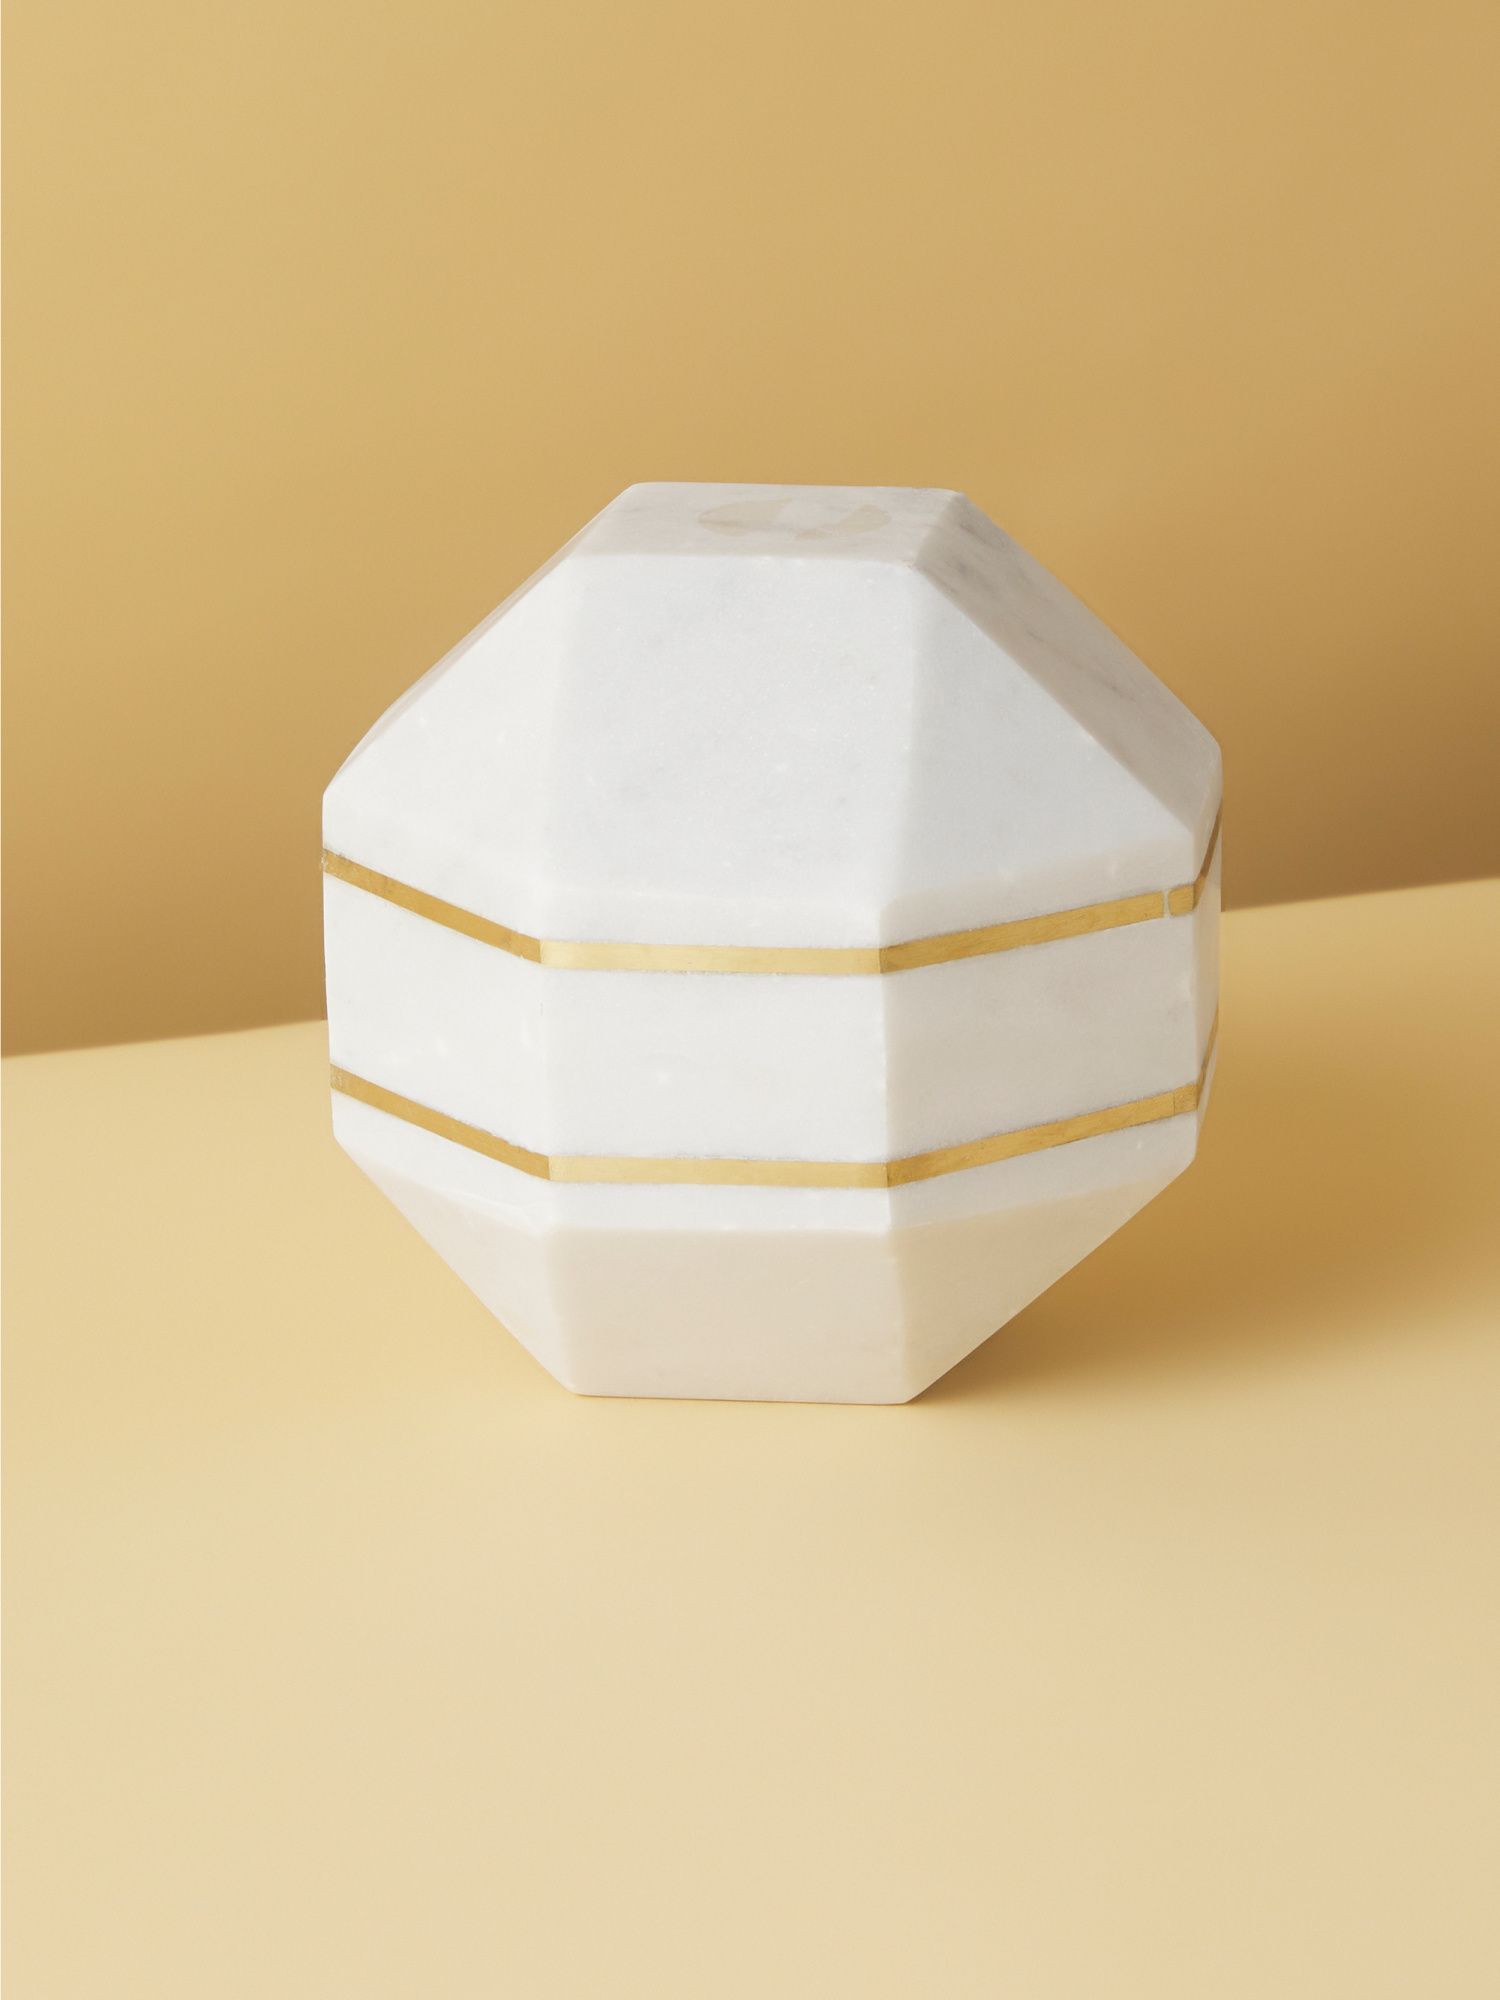 6in Marble Octagon Decor | Decorative Objects | HomeGoods | HomeGoods